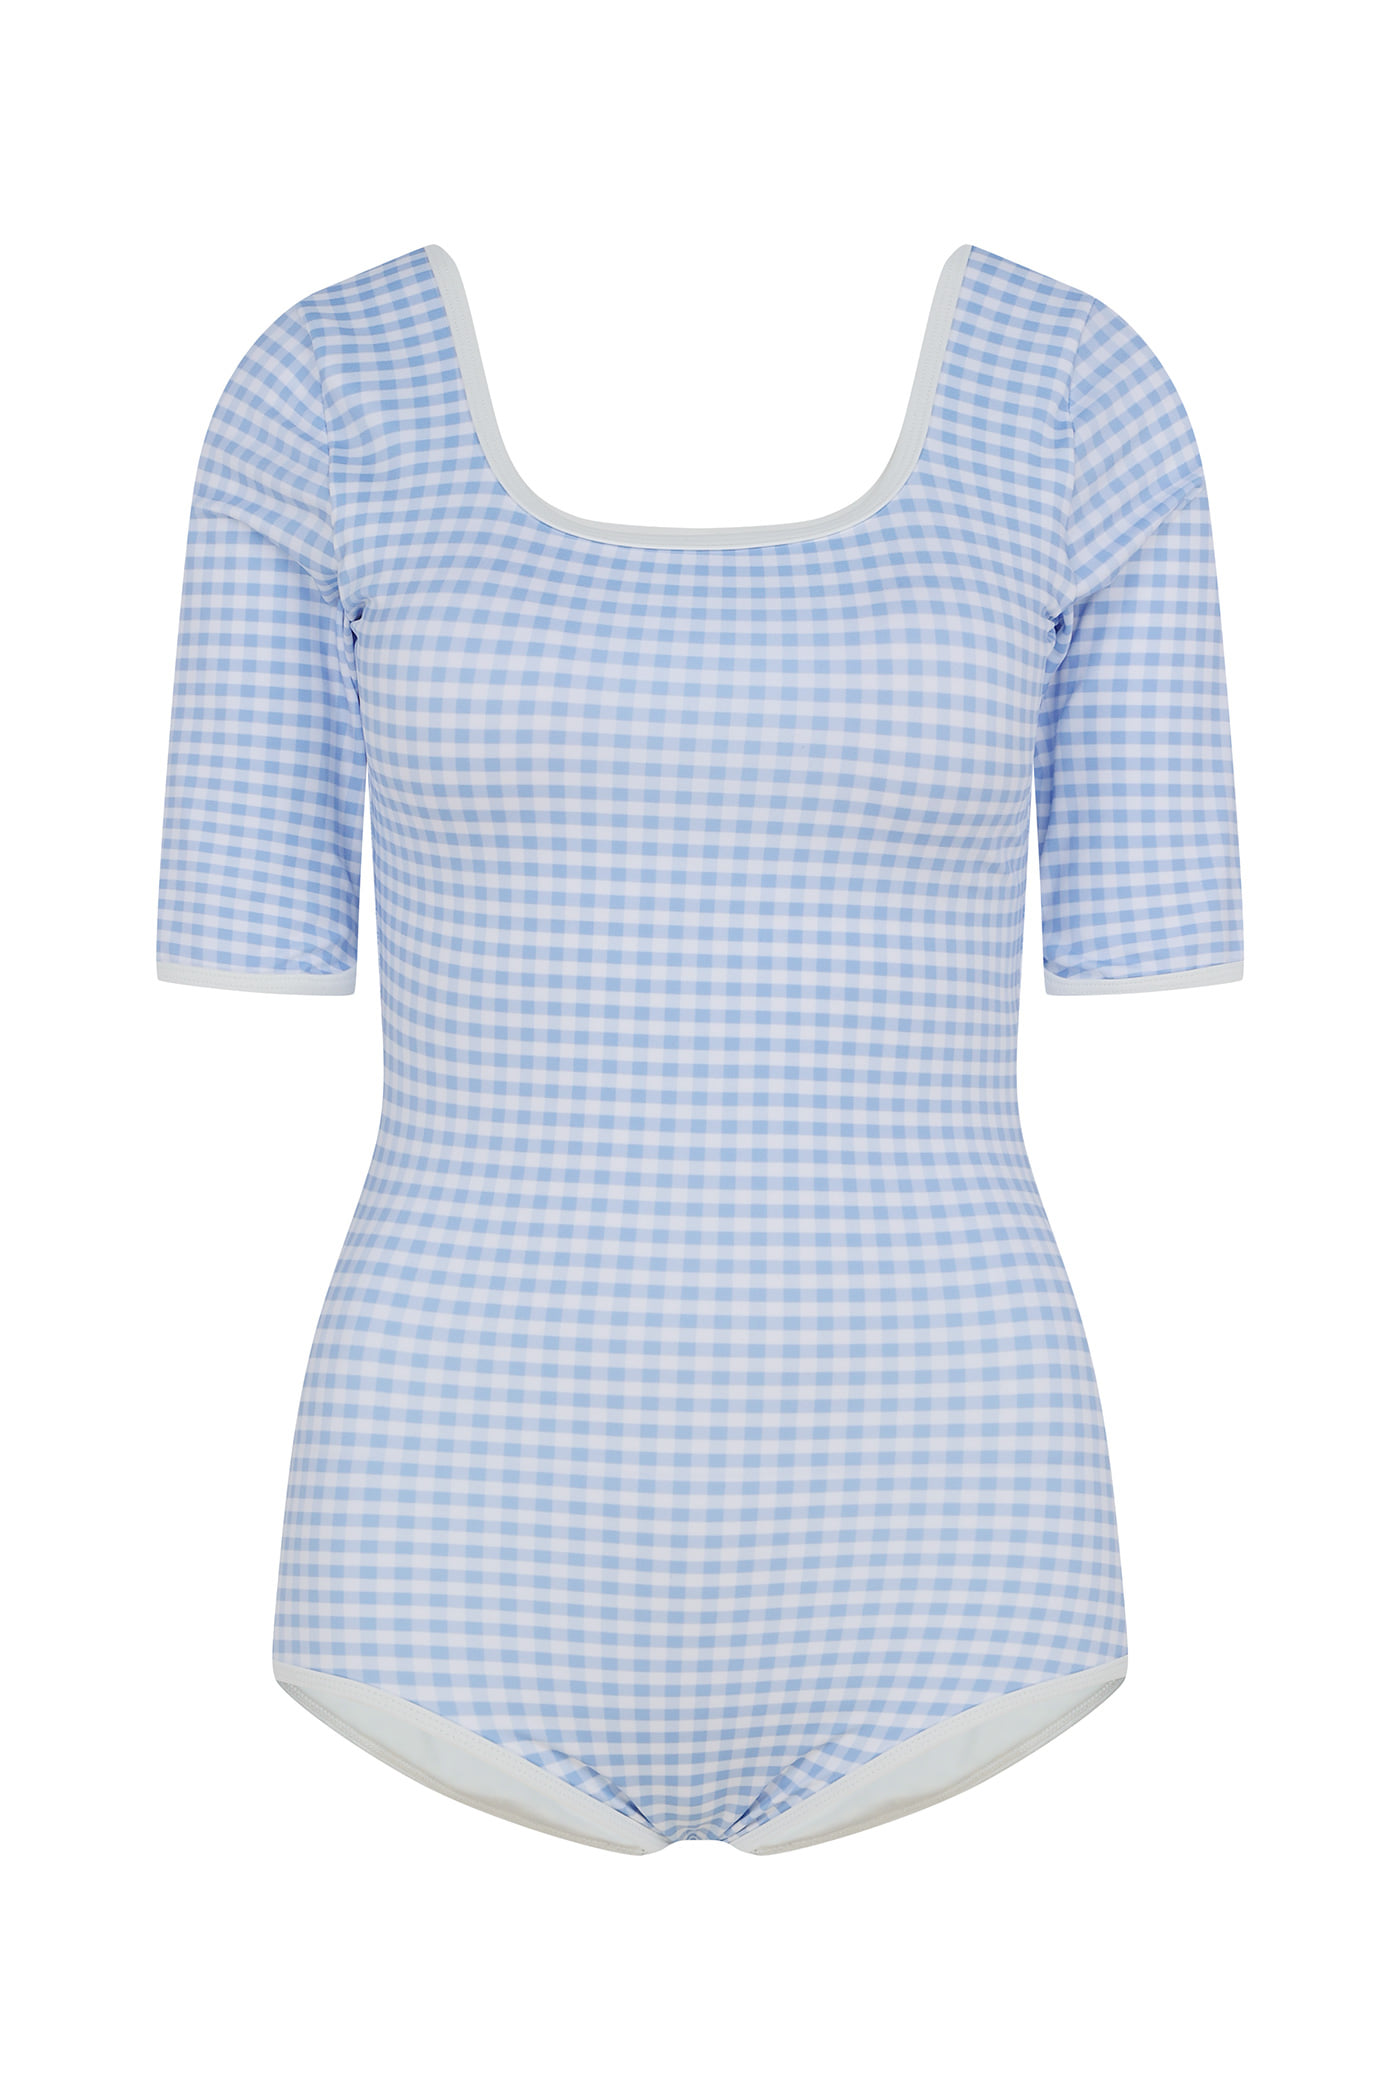 Gingham Check Square Neck SwimSuit-Sky Blue